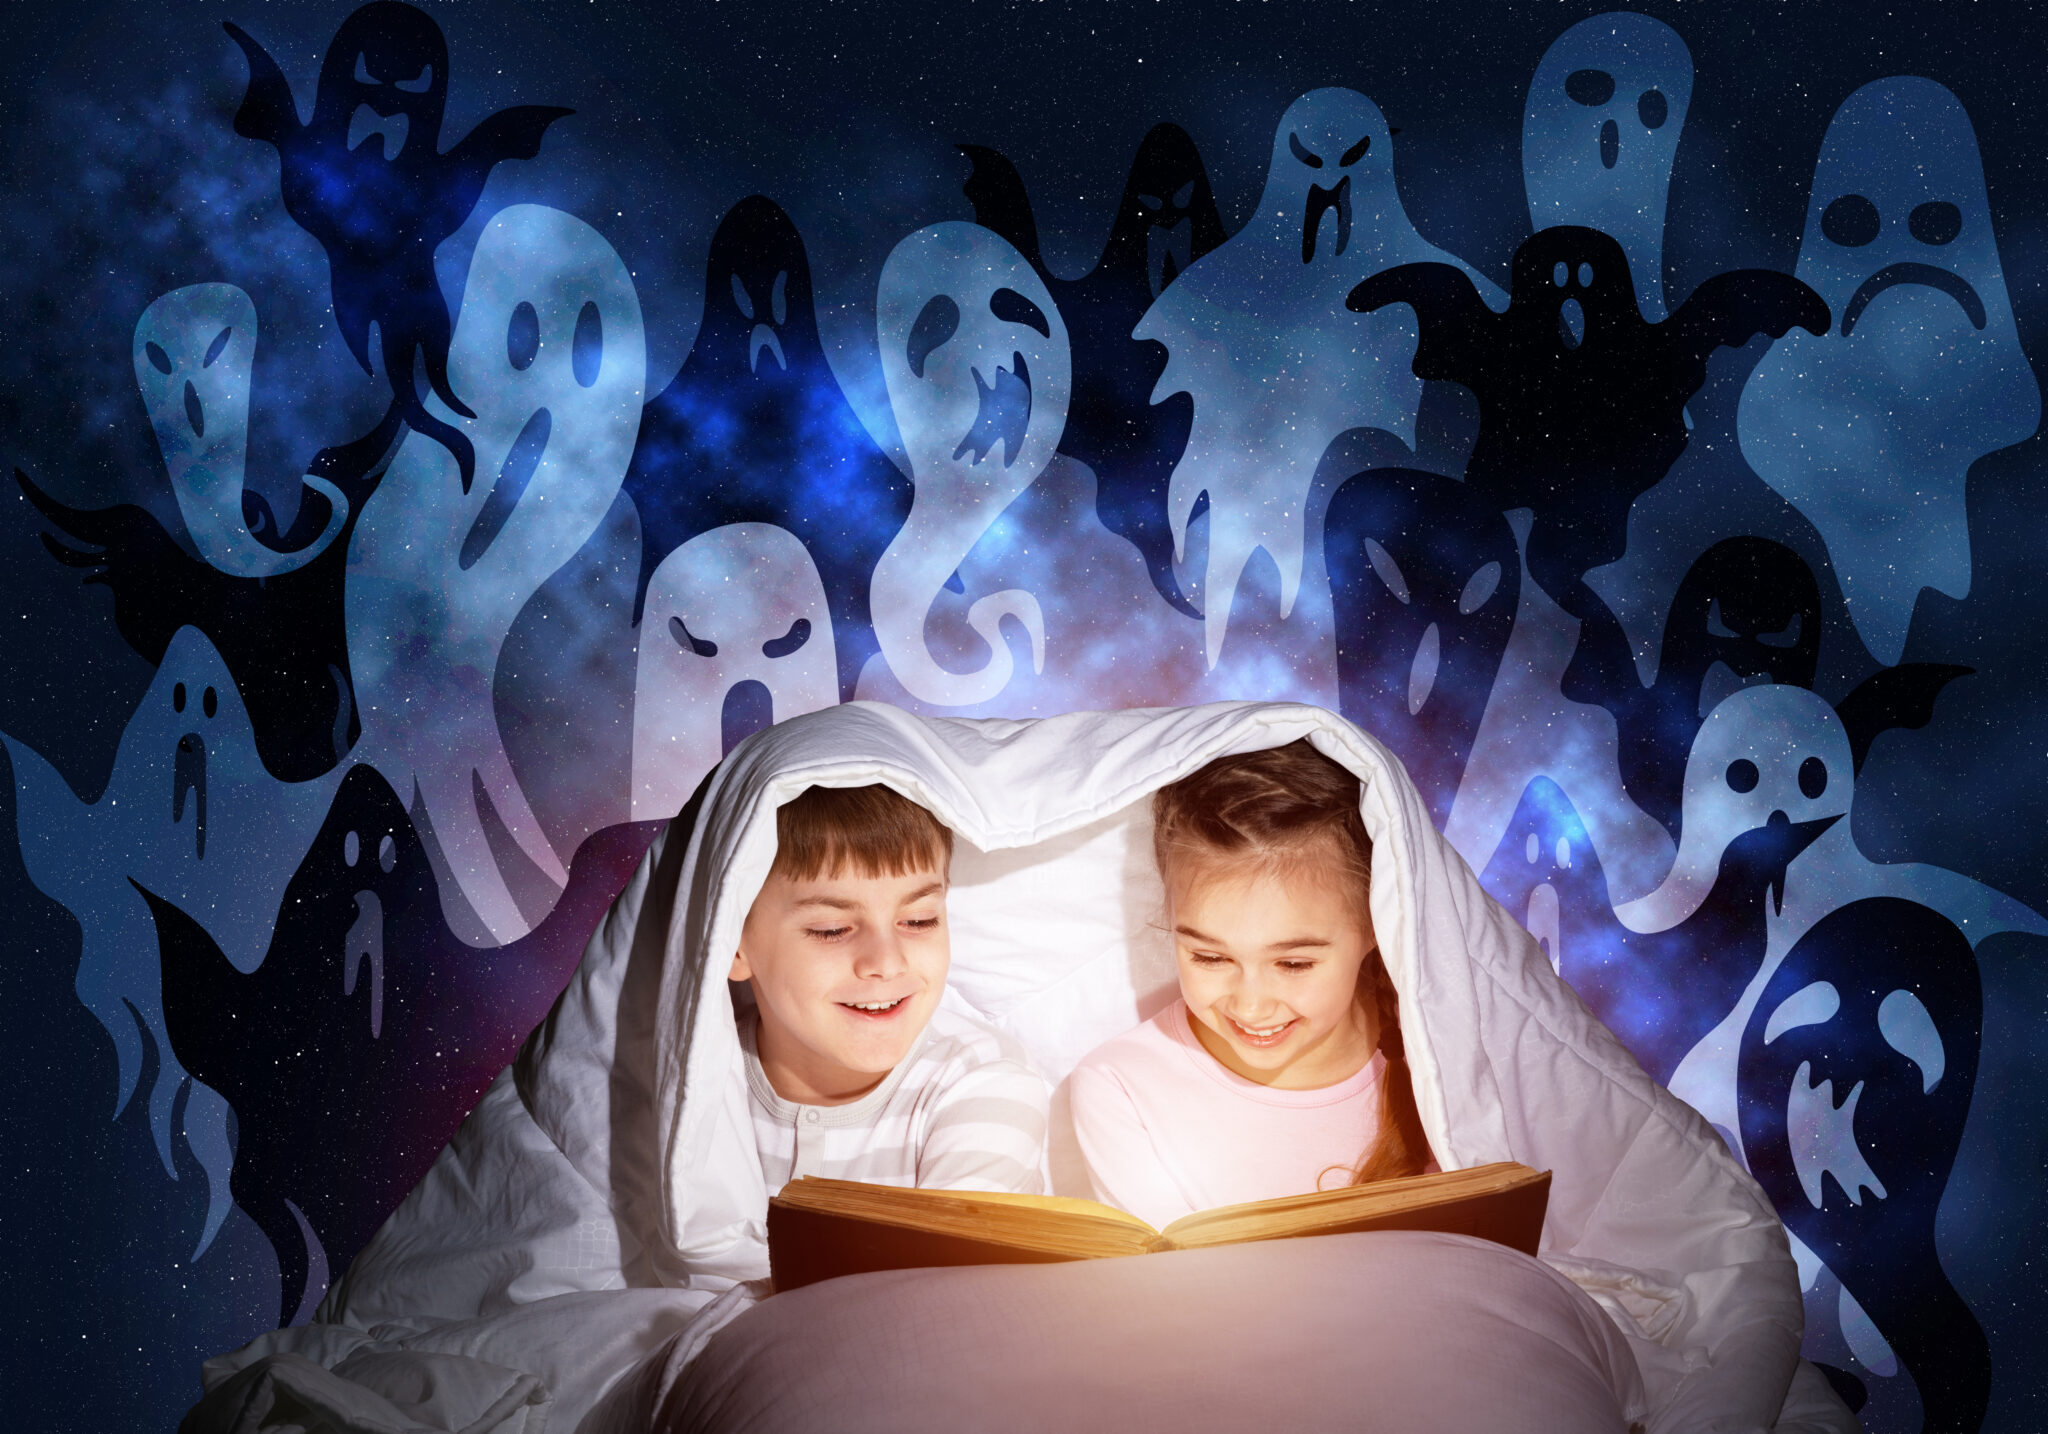 Why Children’s Scary Stories Are Important For Development – LG Cunningham